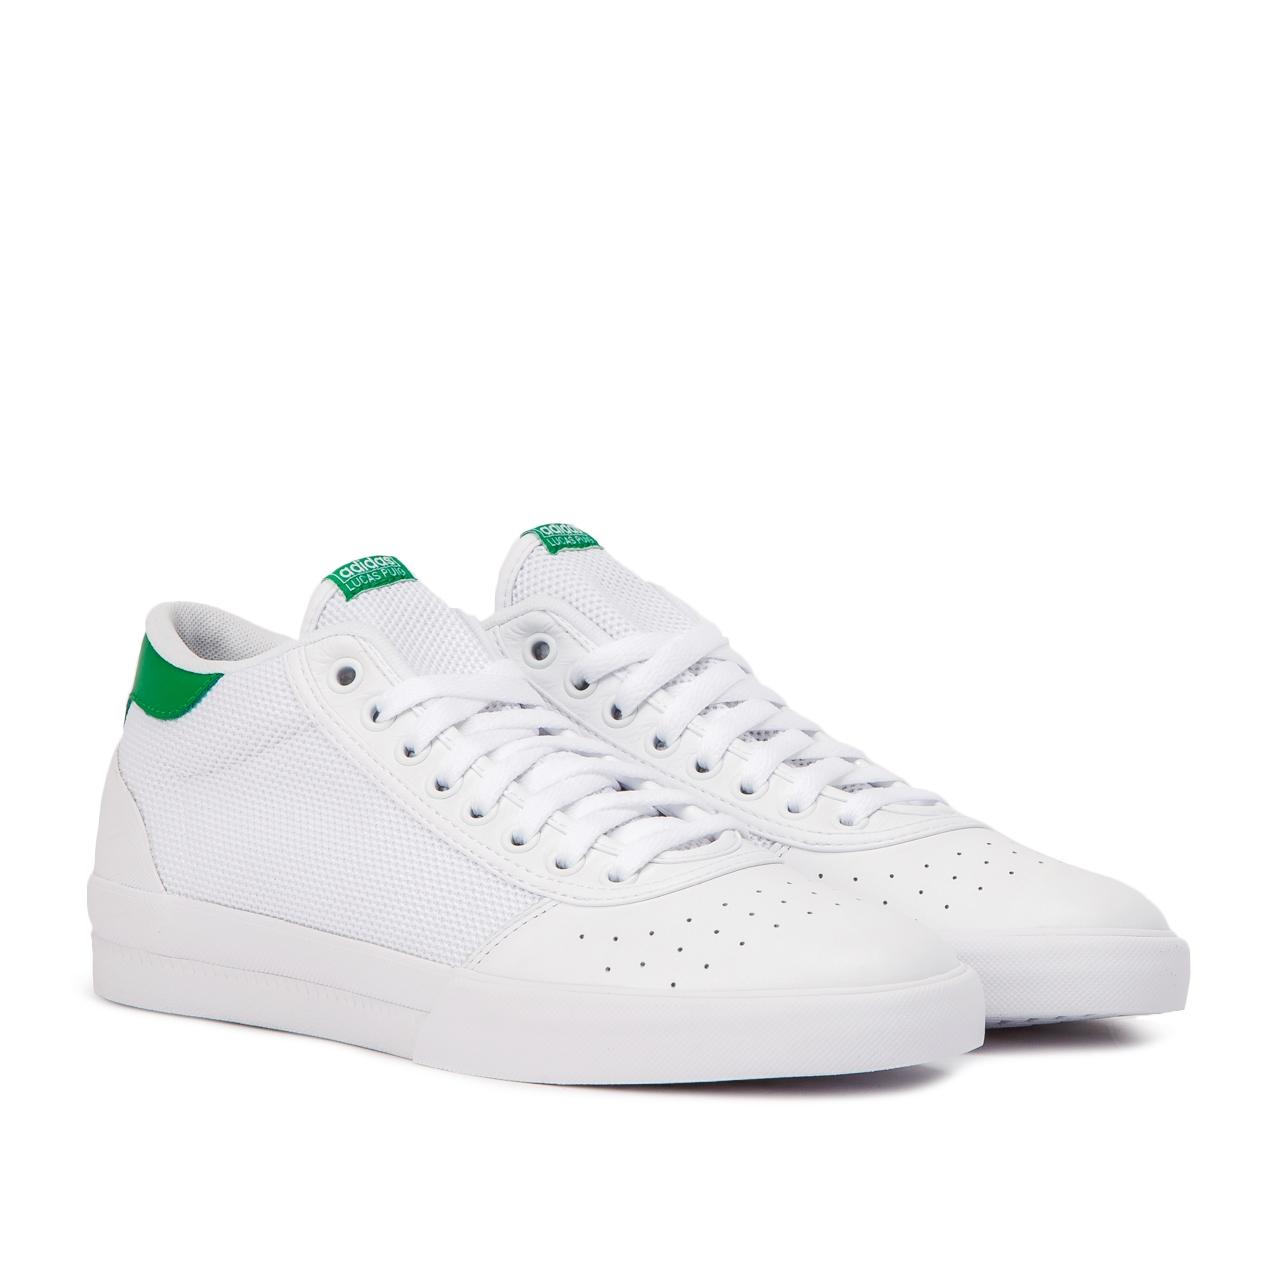 adidas Originals Leather Adidas Lucas Premiere Mid in White for Men - Lyst